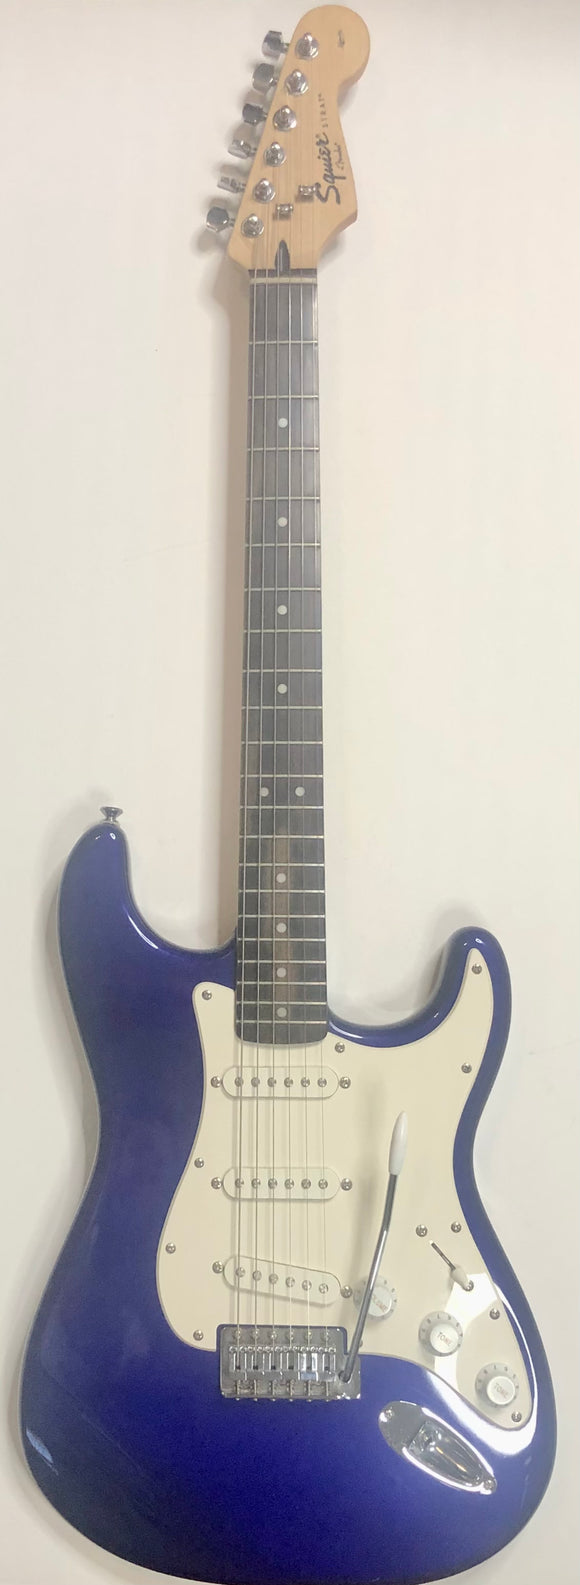 Squire Stratocaster by Fender Blue Electric Guitar